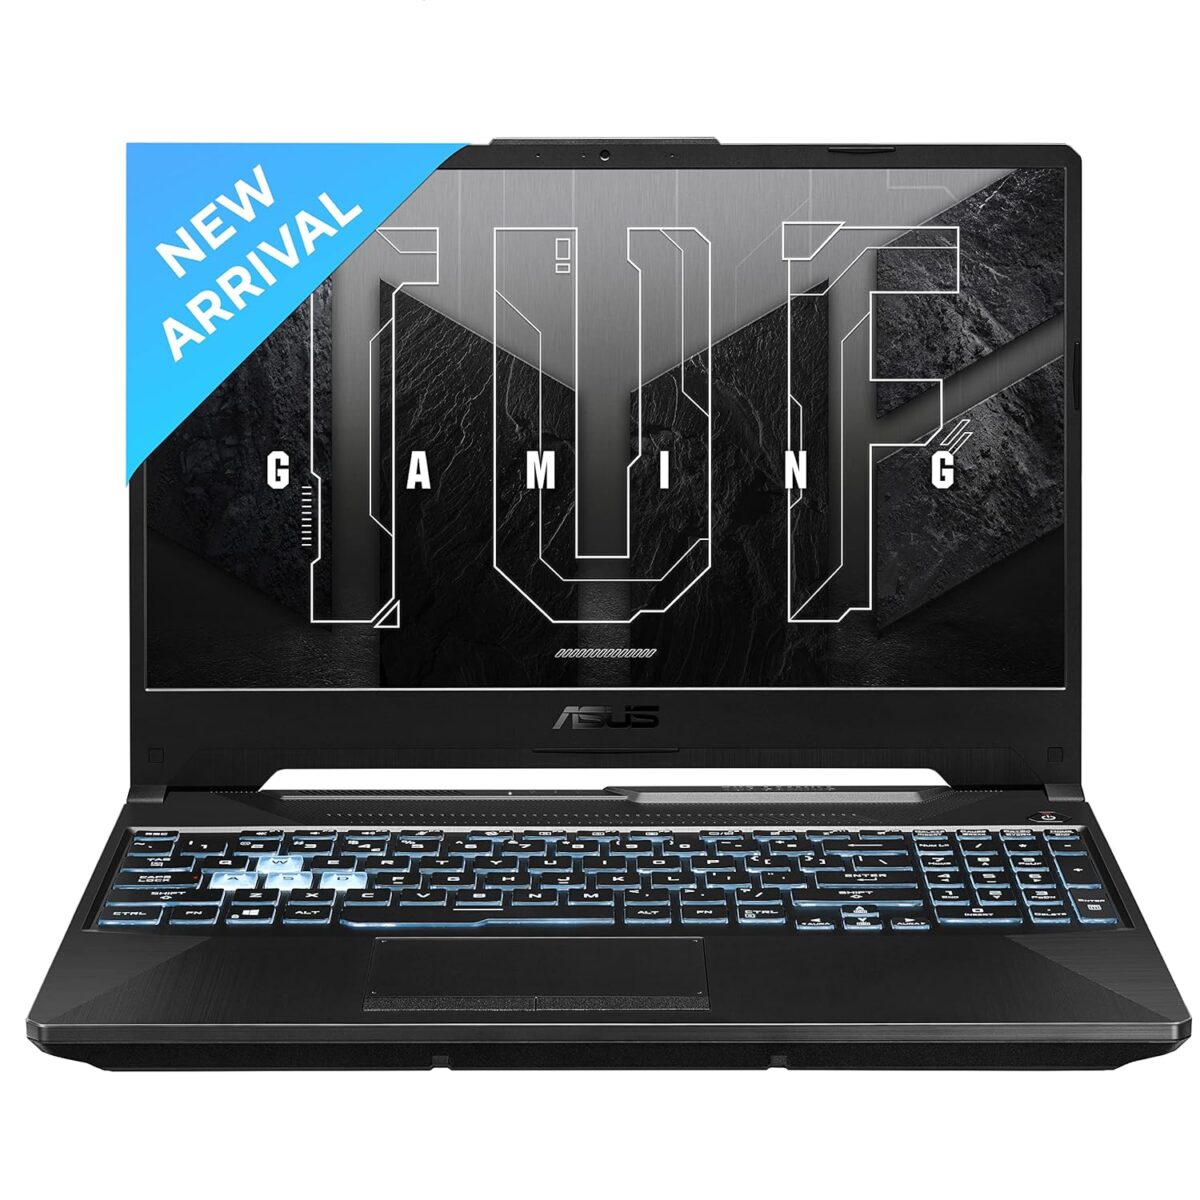 ASUS TUF Gaming A15 FA506NCR-HN054W Laptop Launched in India: Check Price, Specs, and More